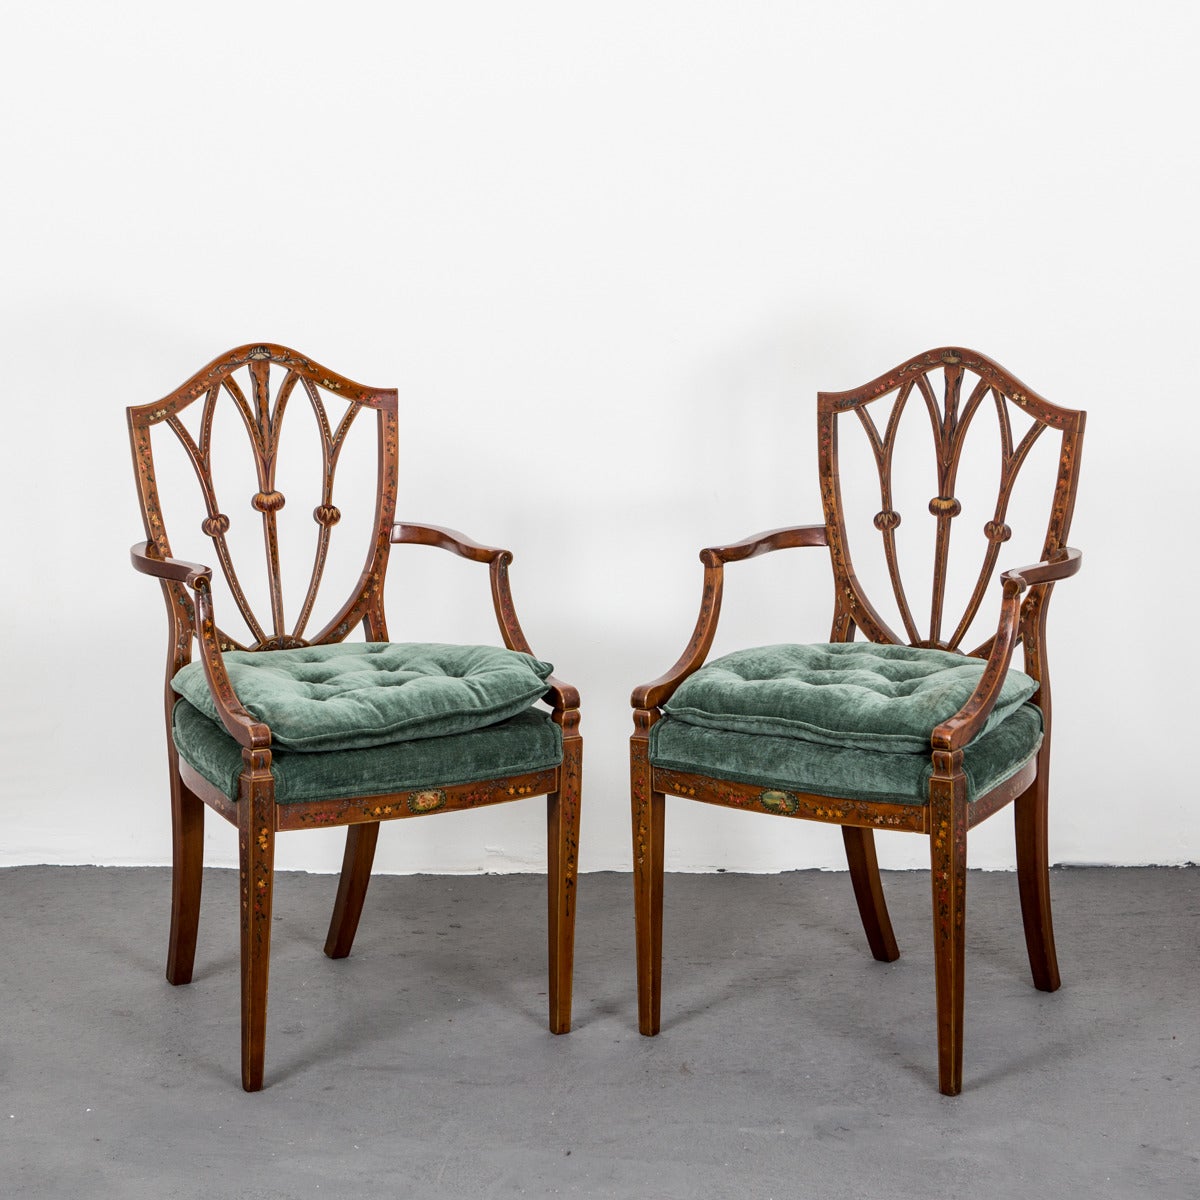 A pair of English armchairs in mahogany with painted colorful details made during the 18th Century Hepplewhite type. Shield shaped back and back curved armrests. Previously owned by an opera singer from Manhattan, New York. Upholstery contemporary.